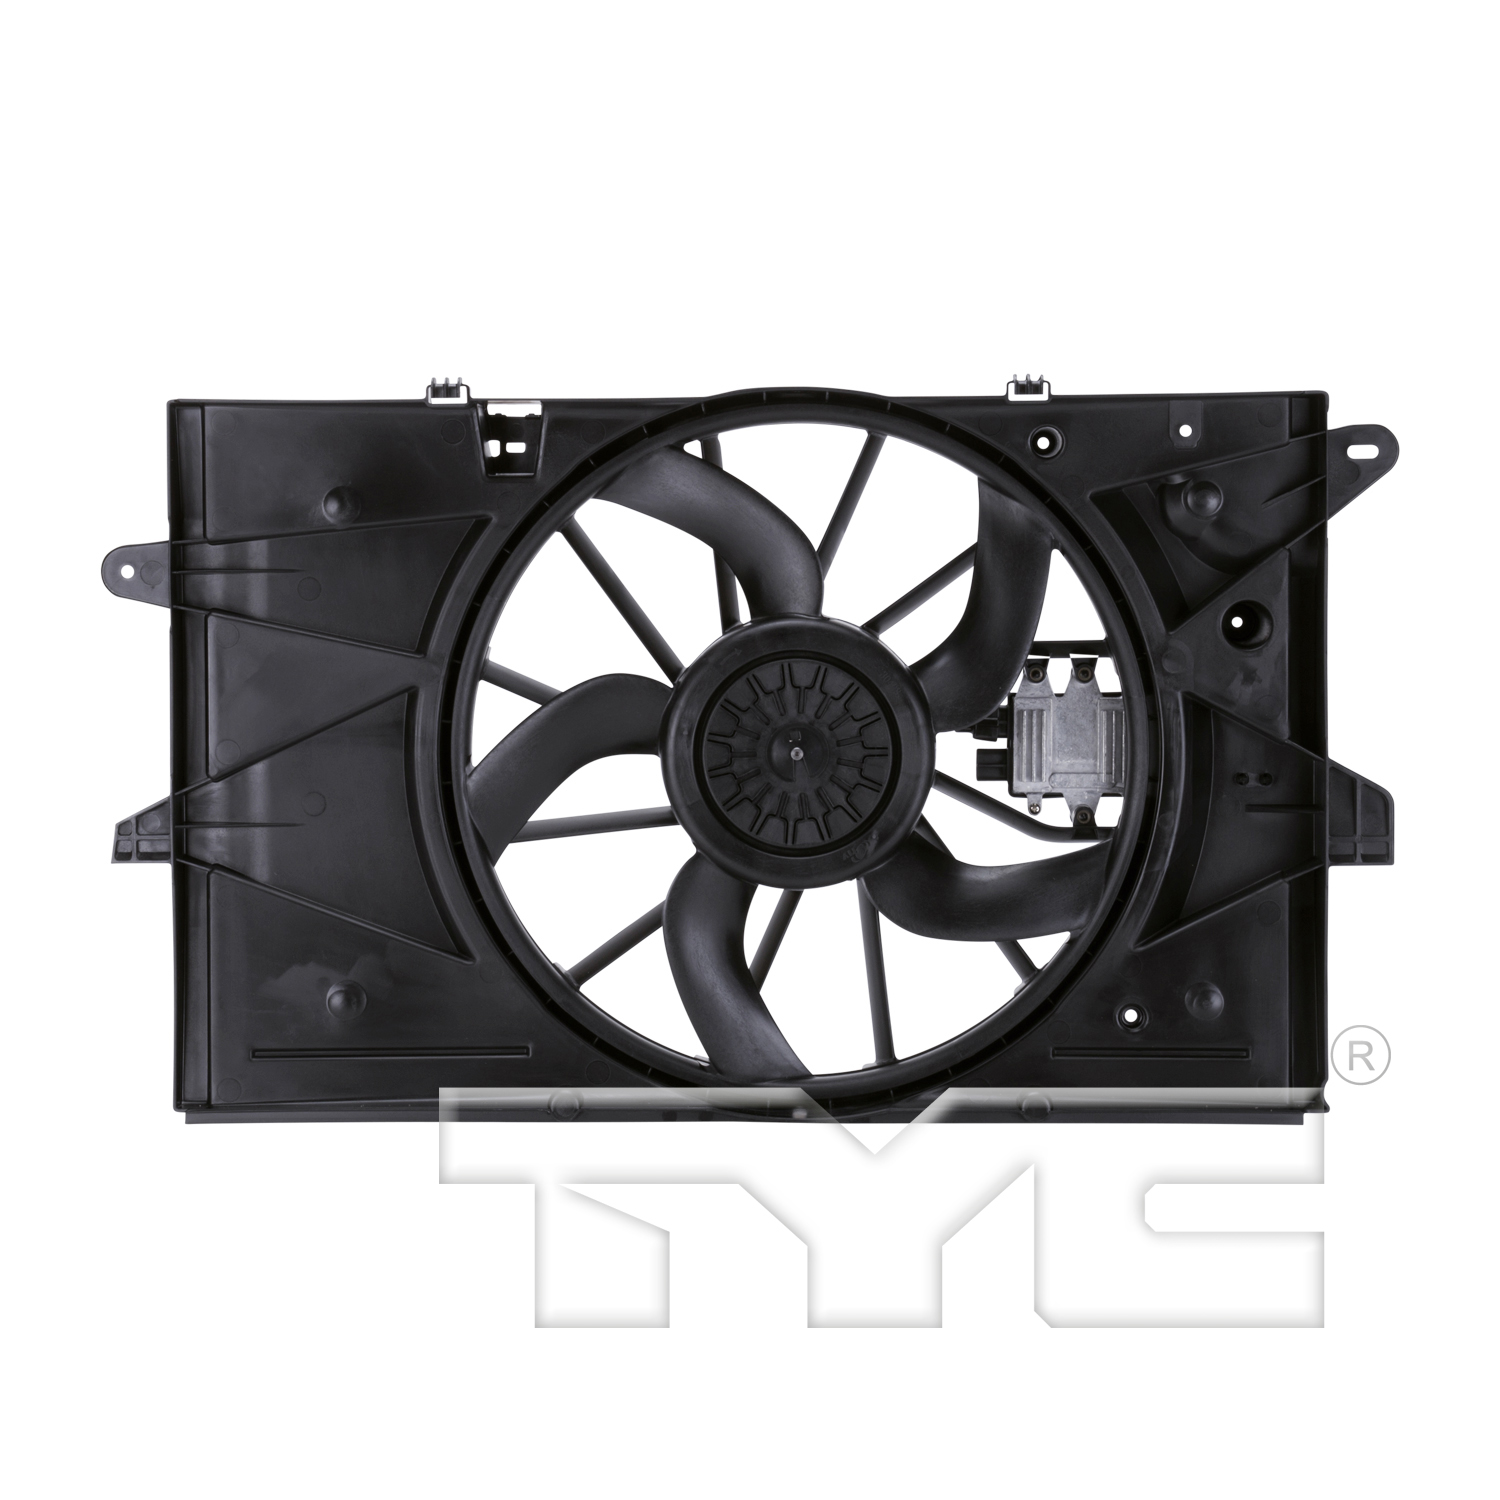 Aftermarket FAN ASSEMBLY/FAN SHROUDS for MERCURY - SABLE, SABLE,08-09,Radiator cooling fan assy